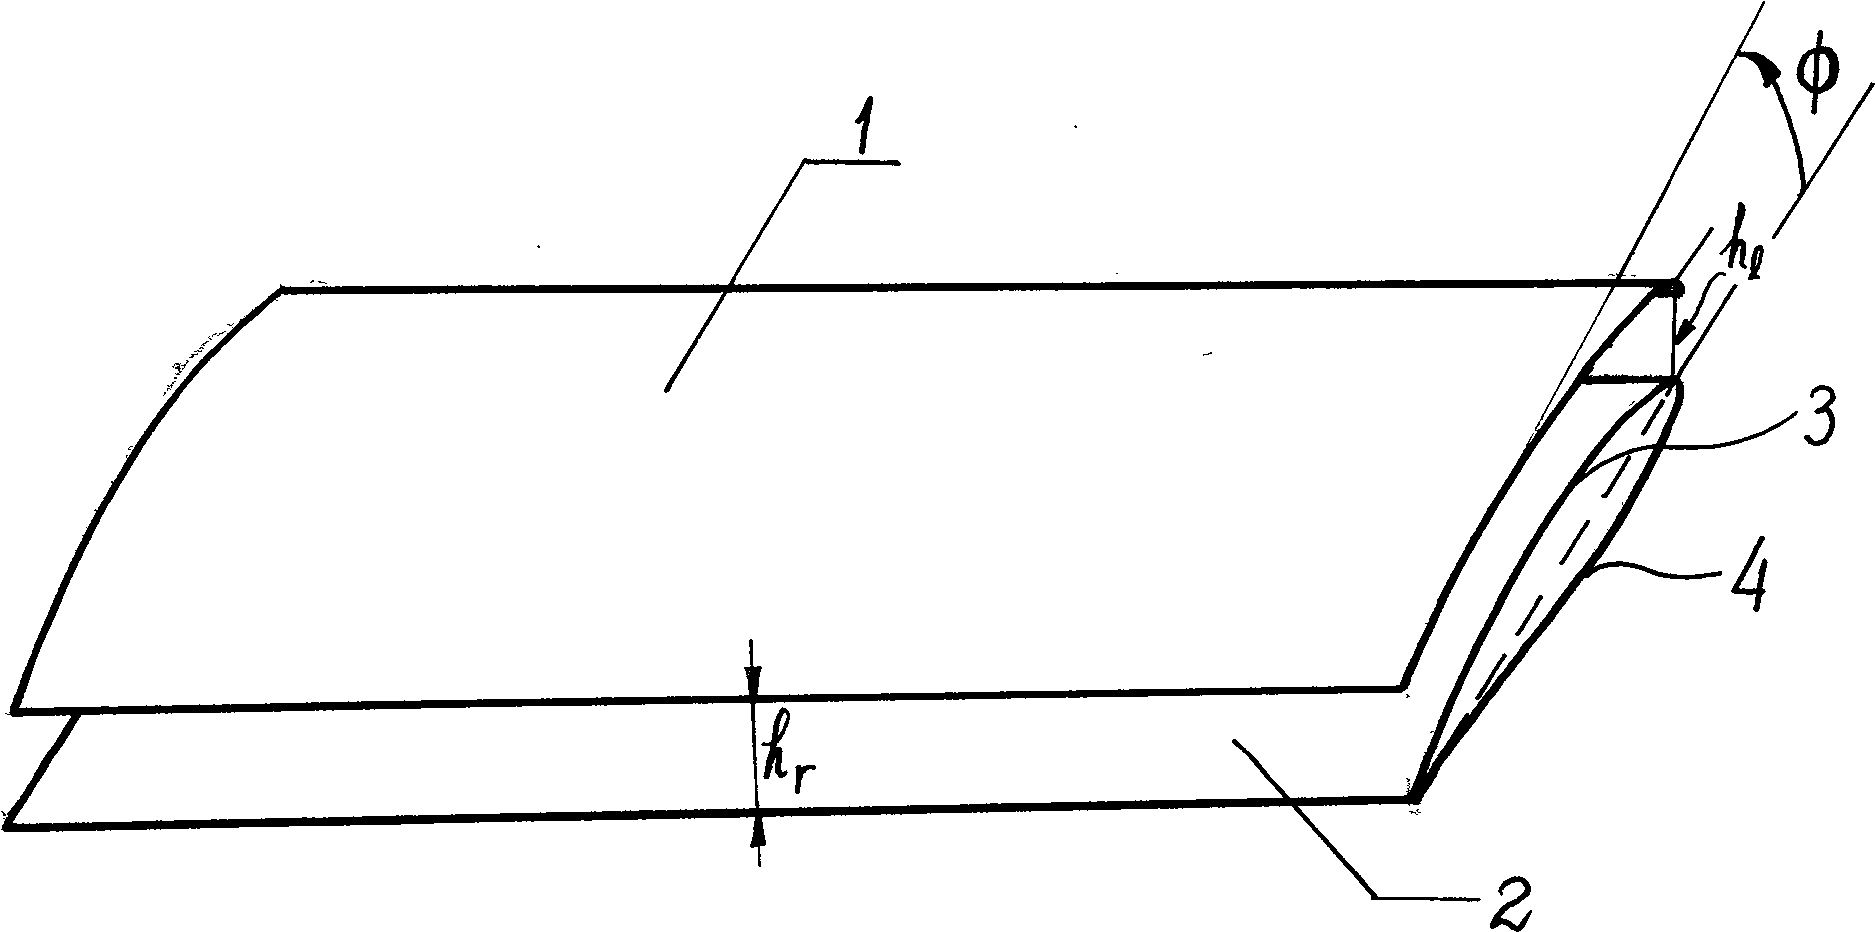 Sail wing for increasing lift force and stalling attack angle